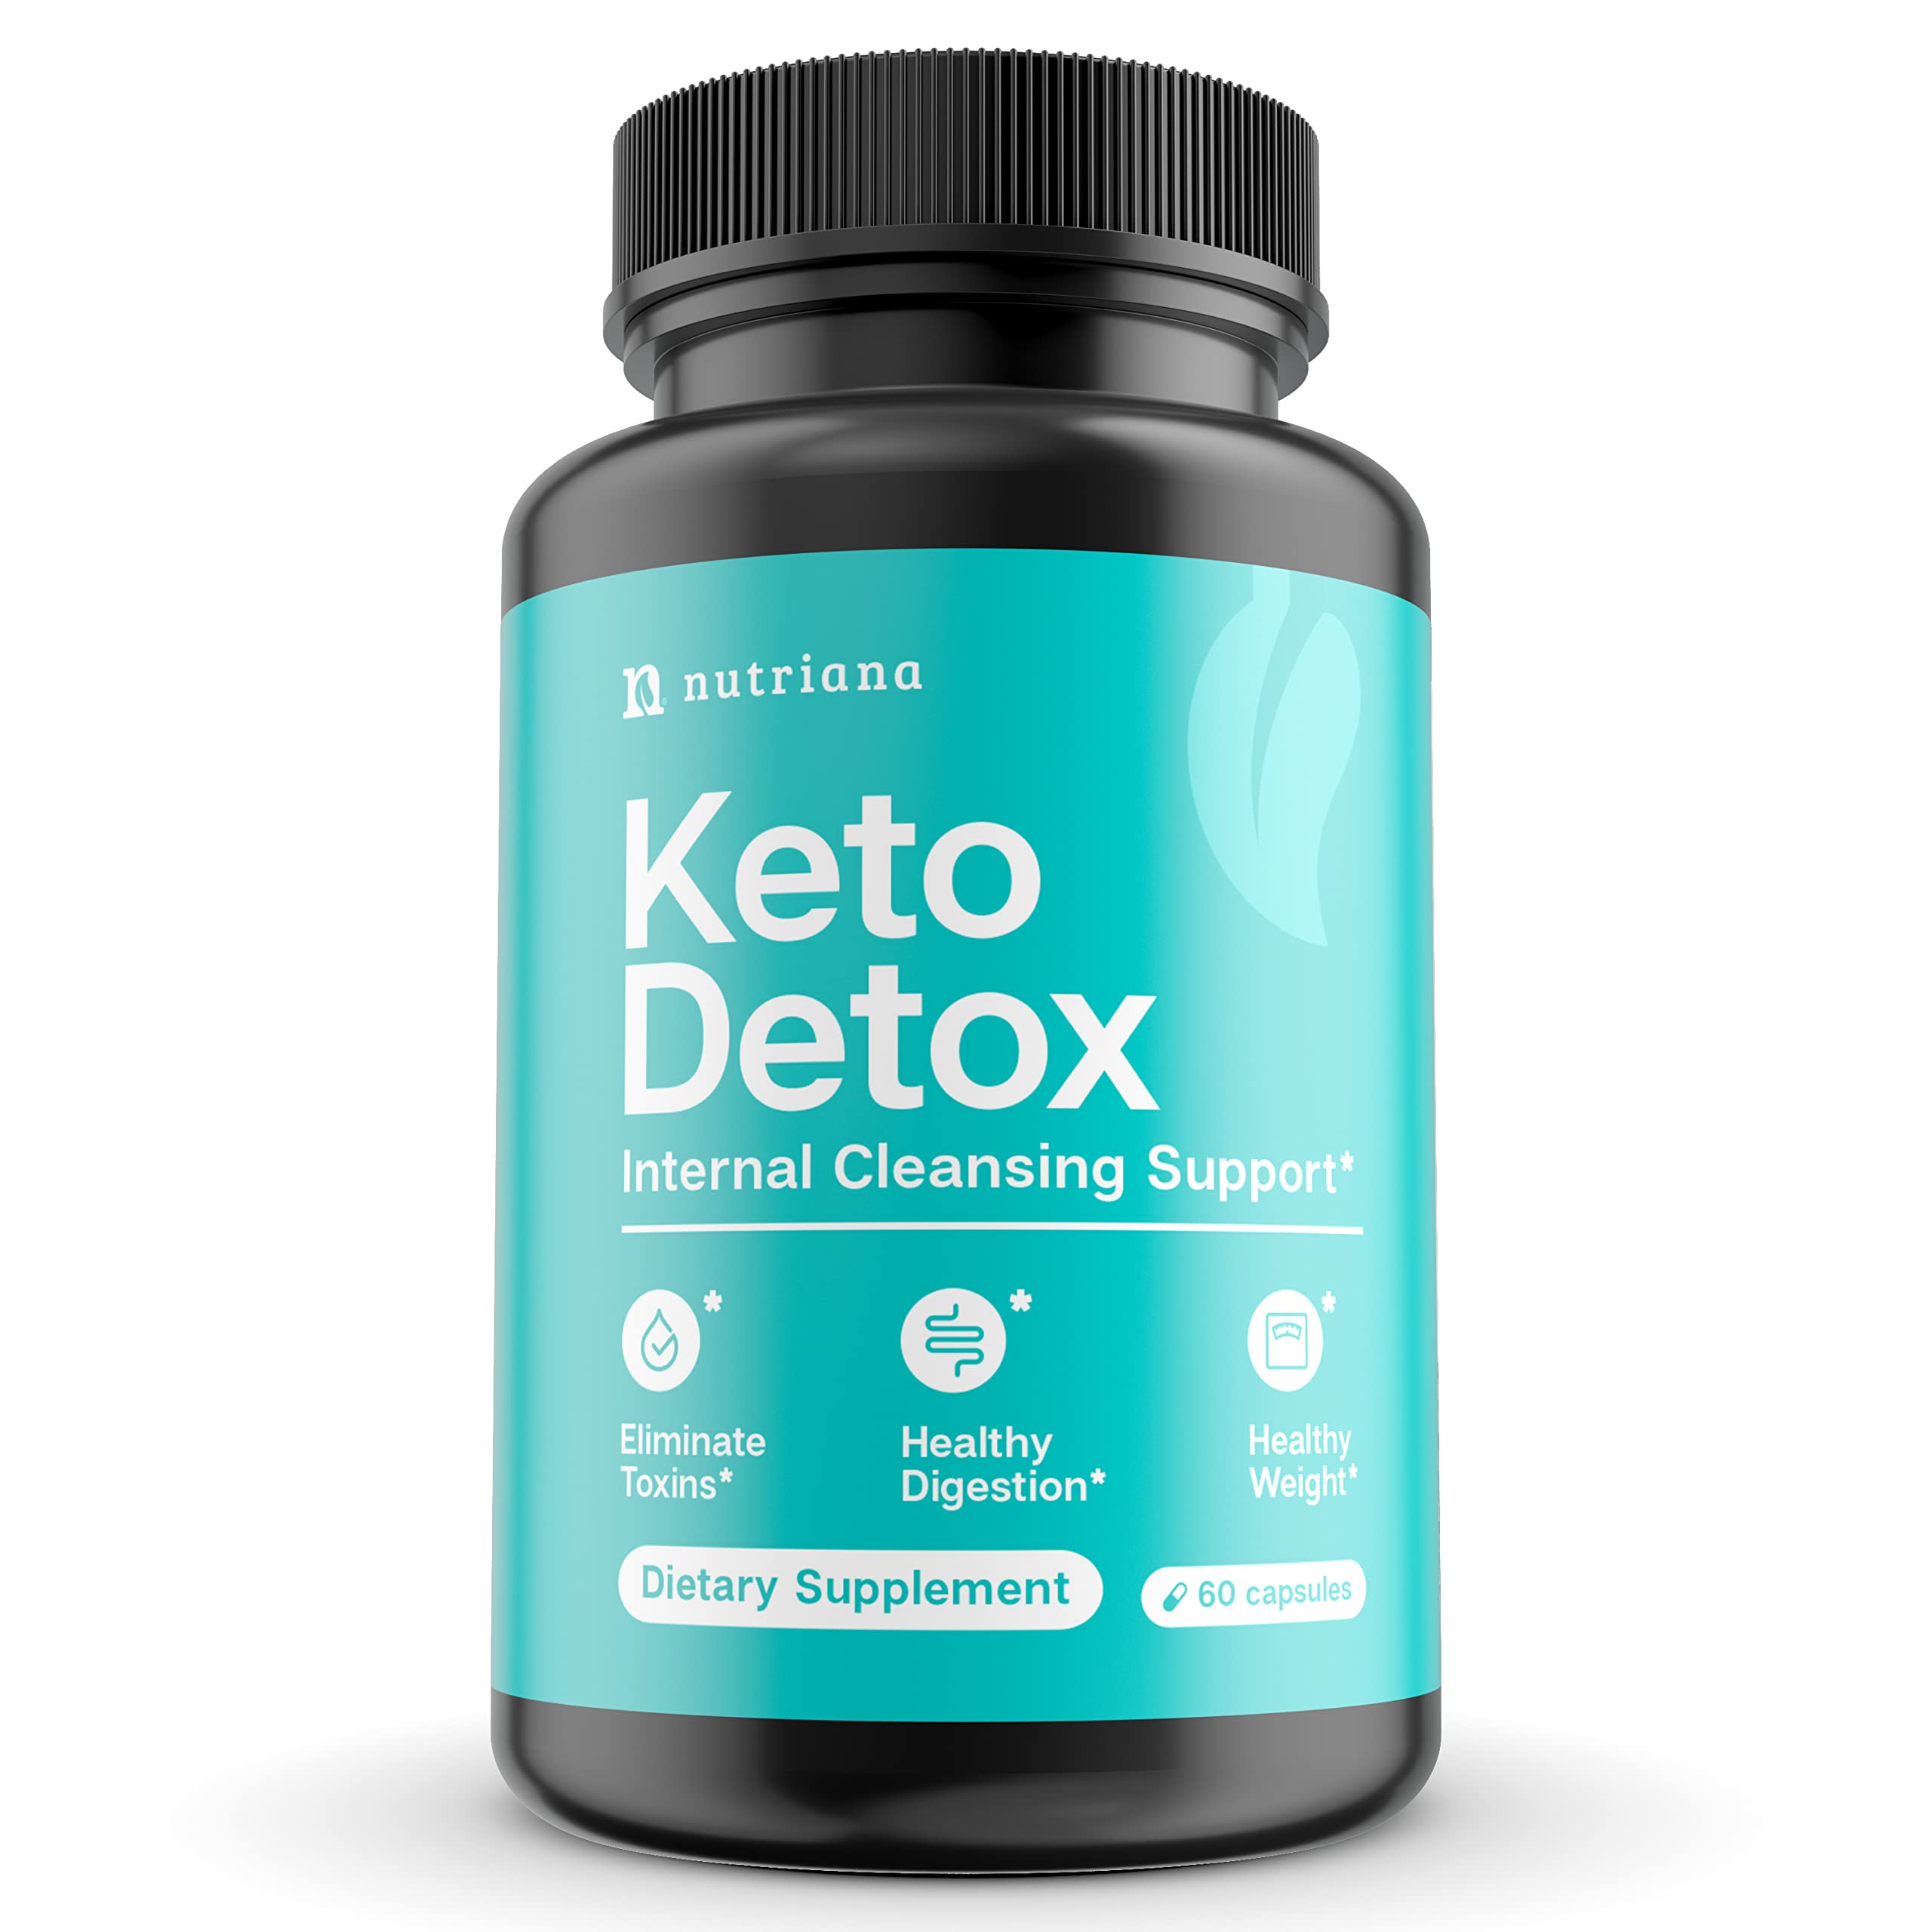 Keto Detox for Colon Cleanse - Advanced Formula Colon Cleanse and Detox Pills - Colon Cleanser for Colon Detox - Keto Diet Support for Colon Health, Boost Energy and Flush Toxins - 60 Count